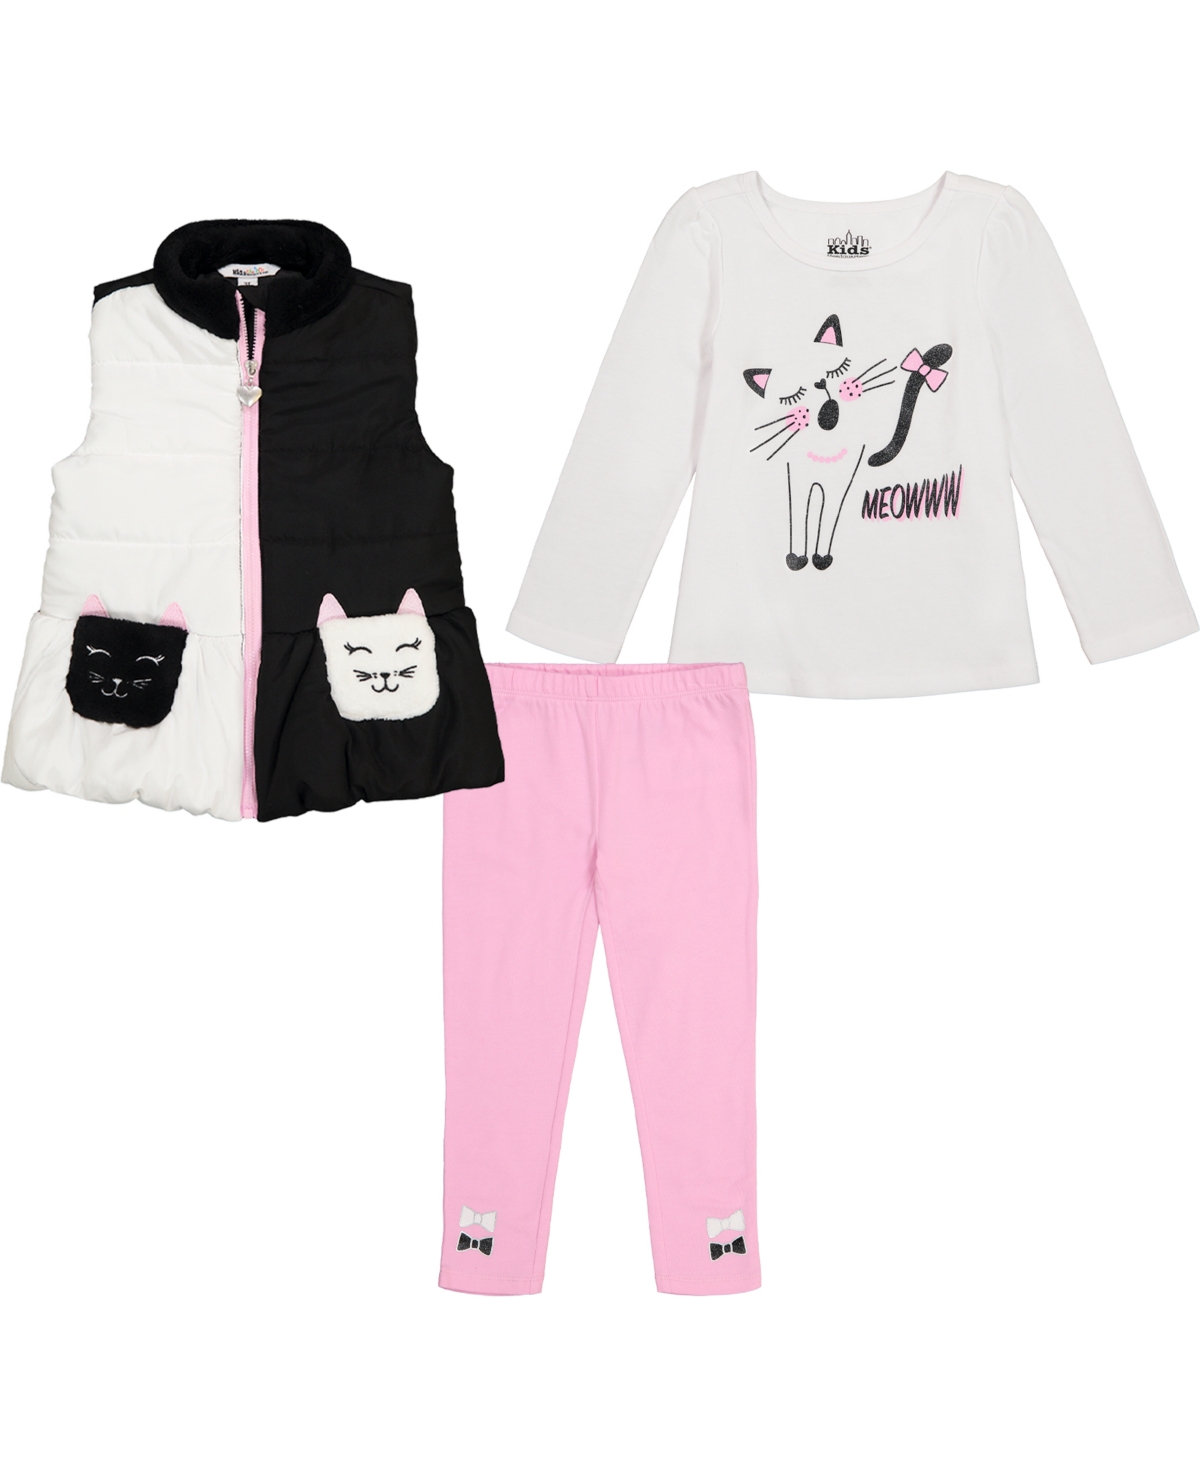 Kids Headquarters Baby Girls Faux-fur Trimmed Vest, Kitty T-shirt And Leggings Set, 3 Piece Set In Black,white